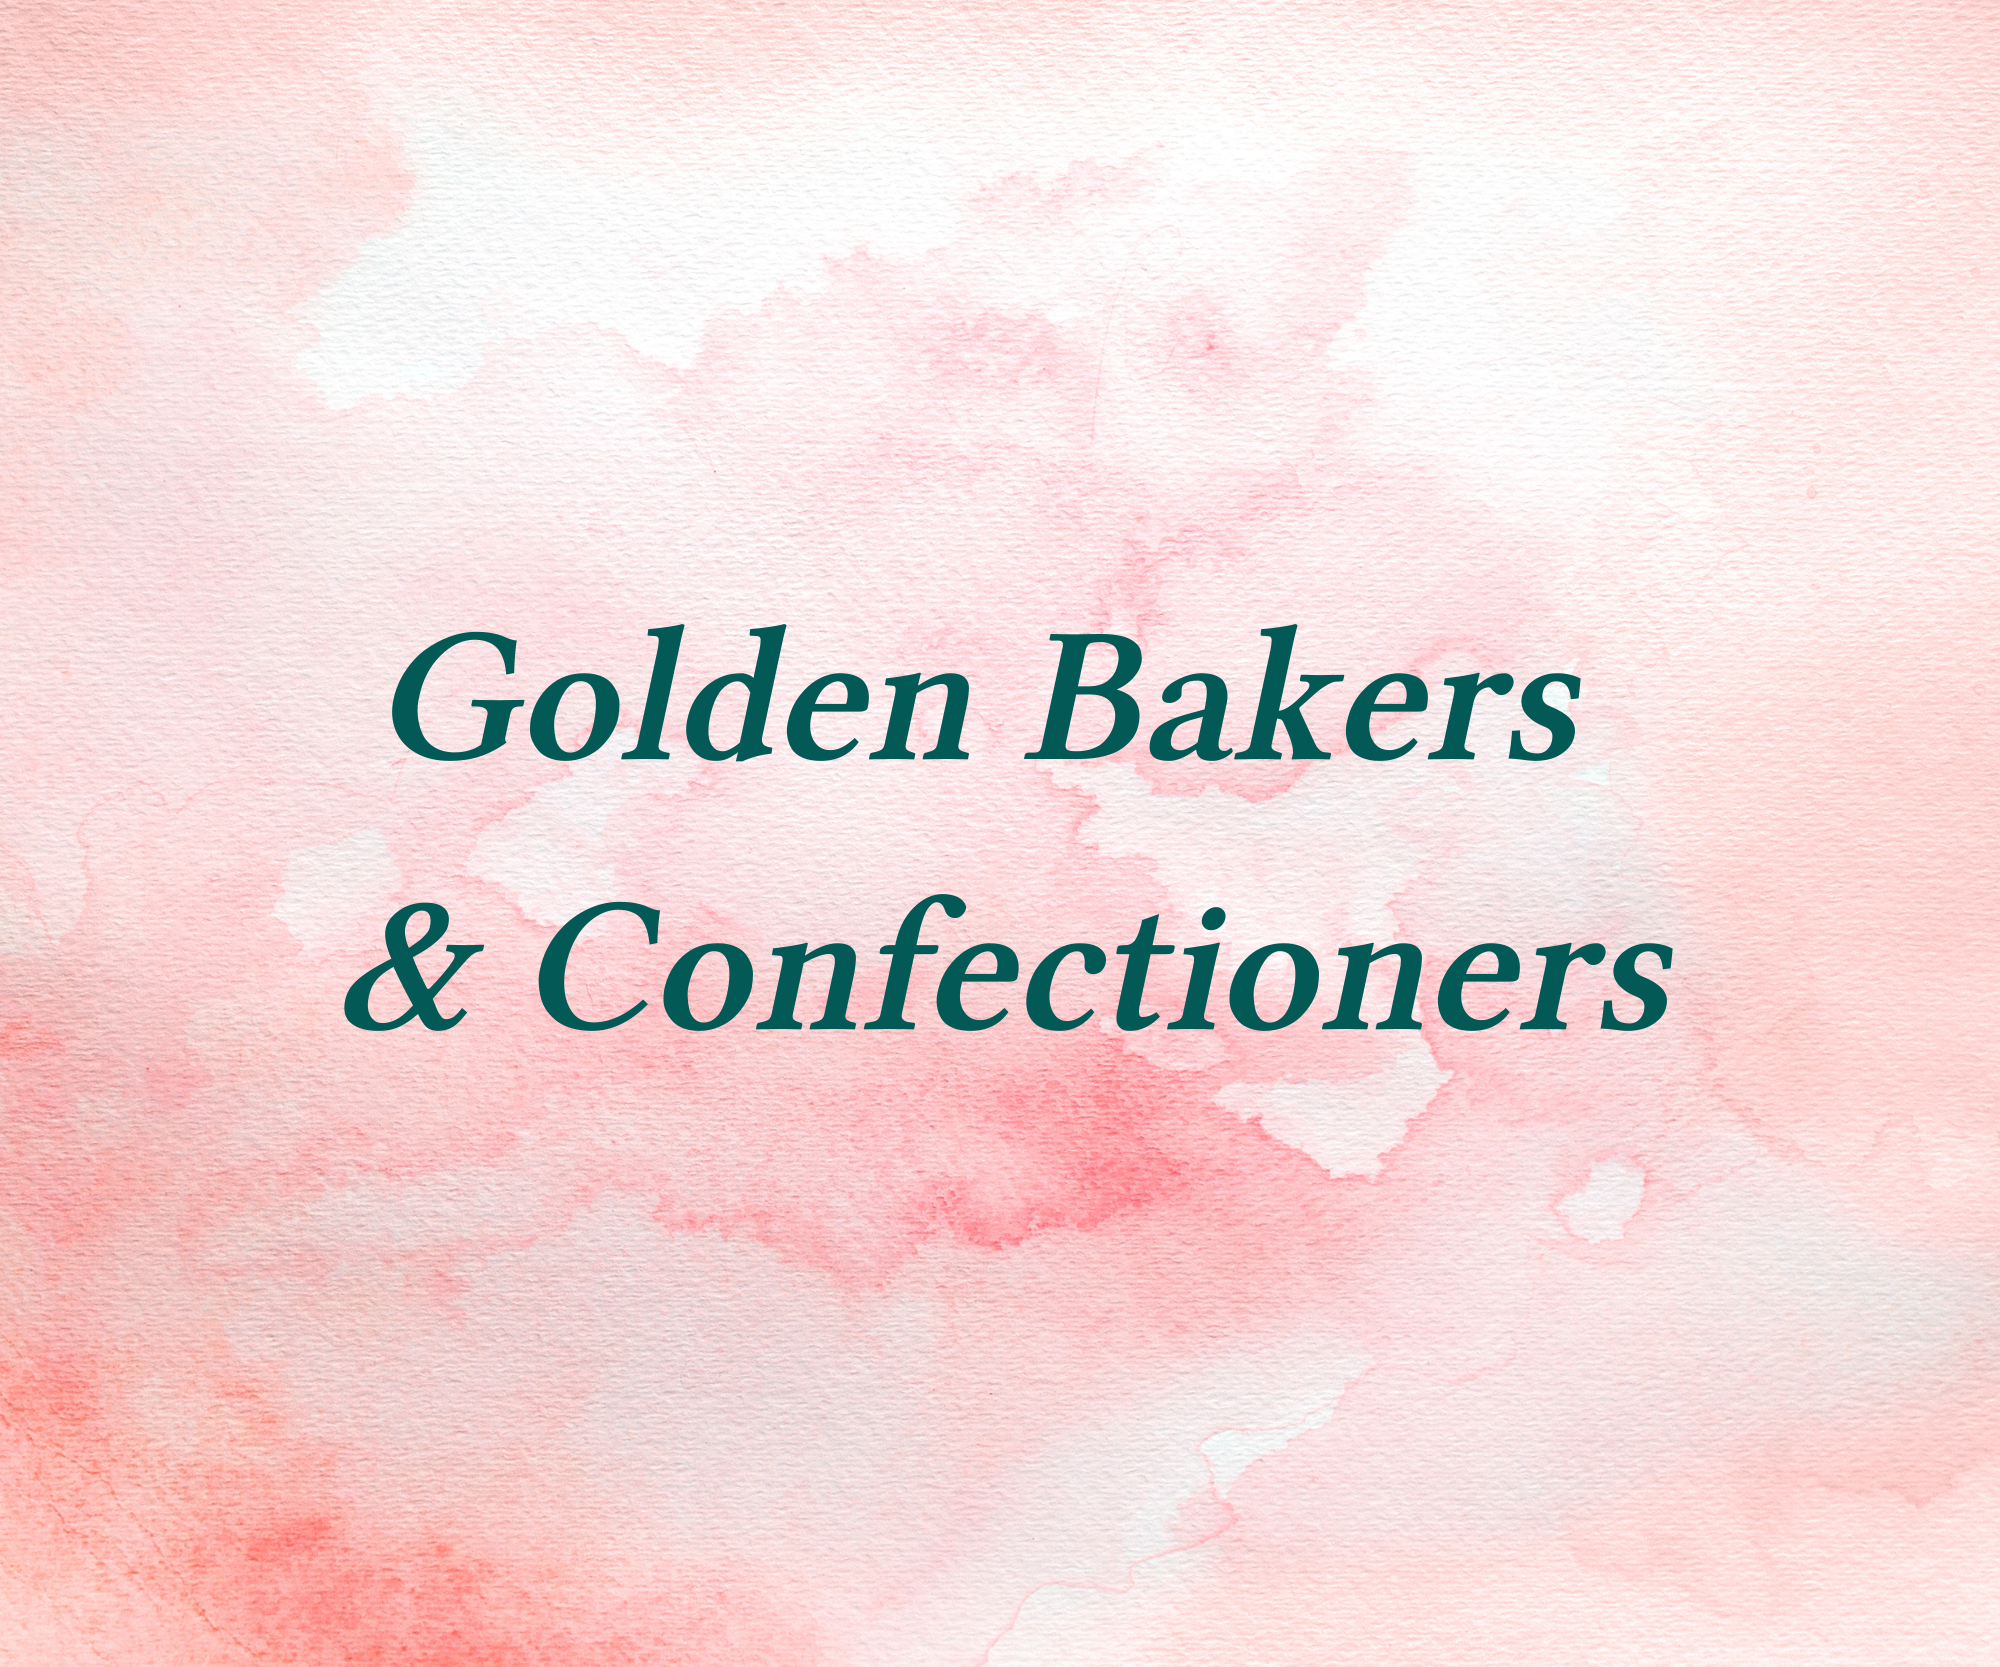 Golden Bakers & Confectioners 